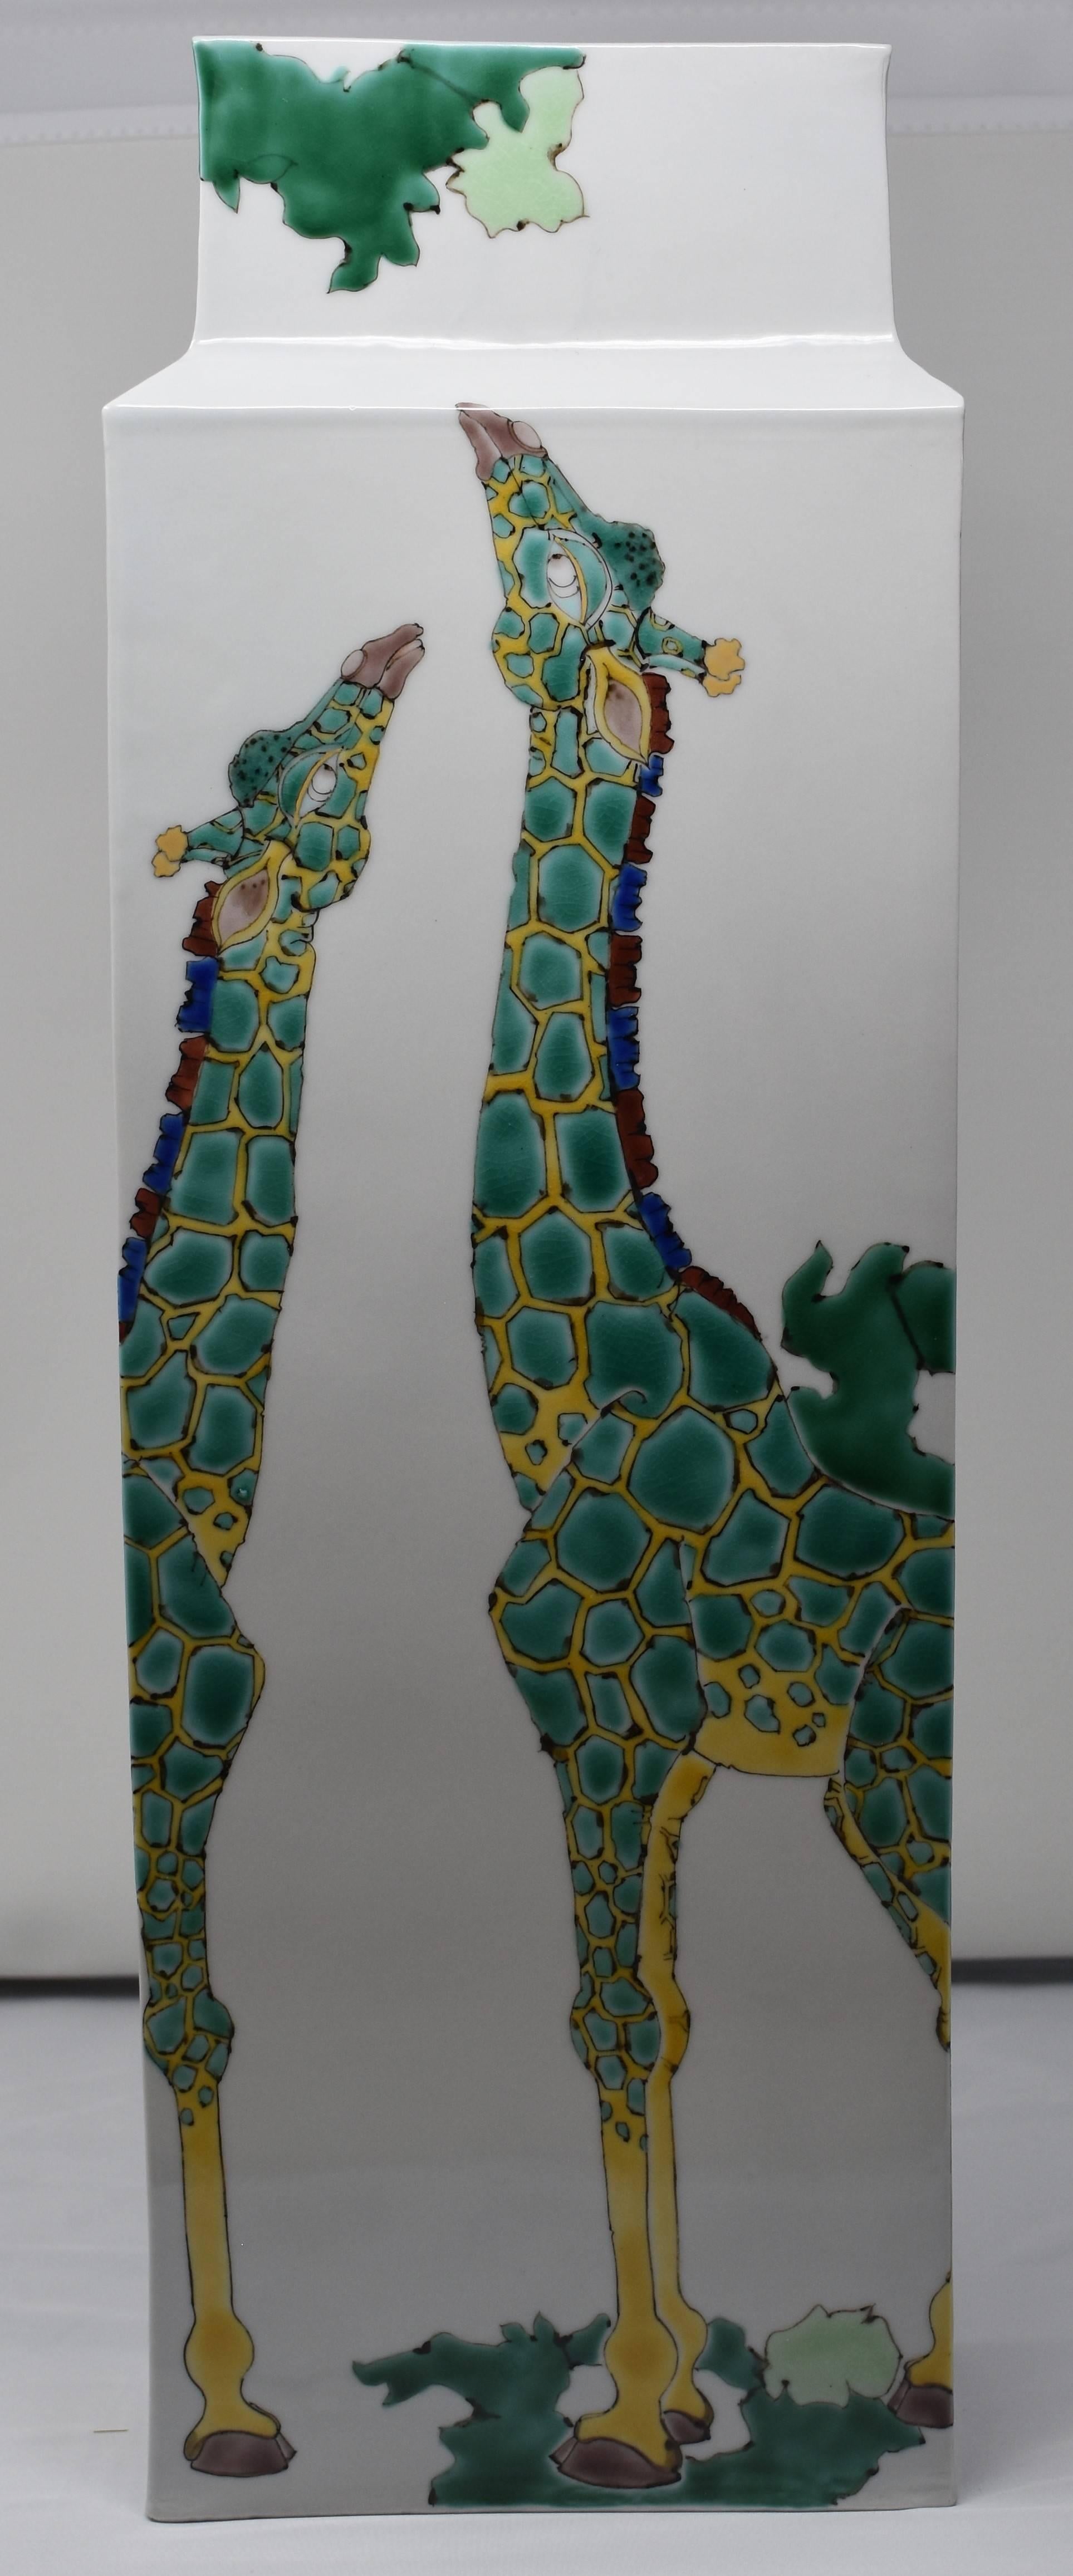 Exquisite contemporary Japanese tall porcelain vase hand-painted in green and yellow on a sgracefully shaped tall rectangular body, with a unique interpretation of giraffes. This is part of a series of pieces featuring the animals of the African